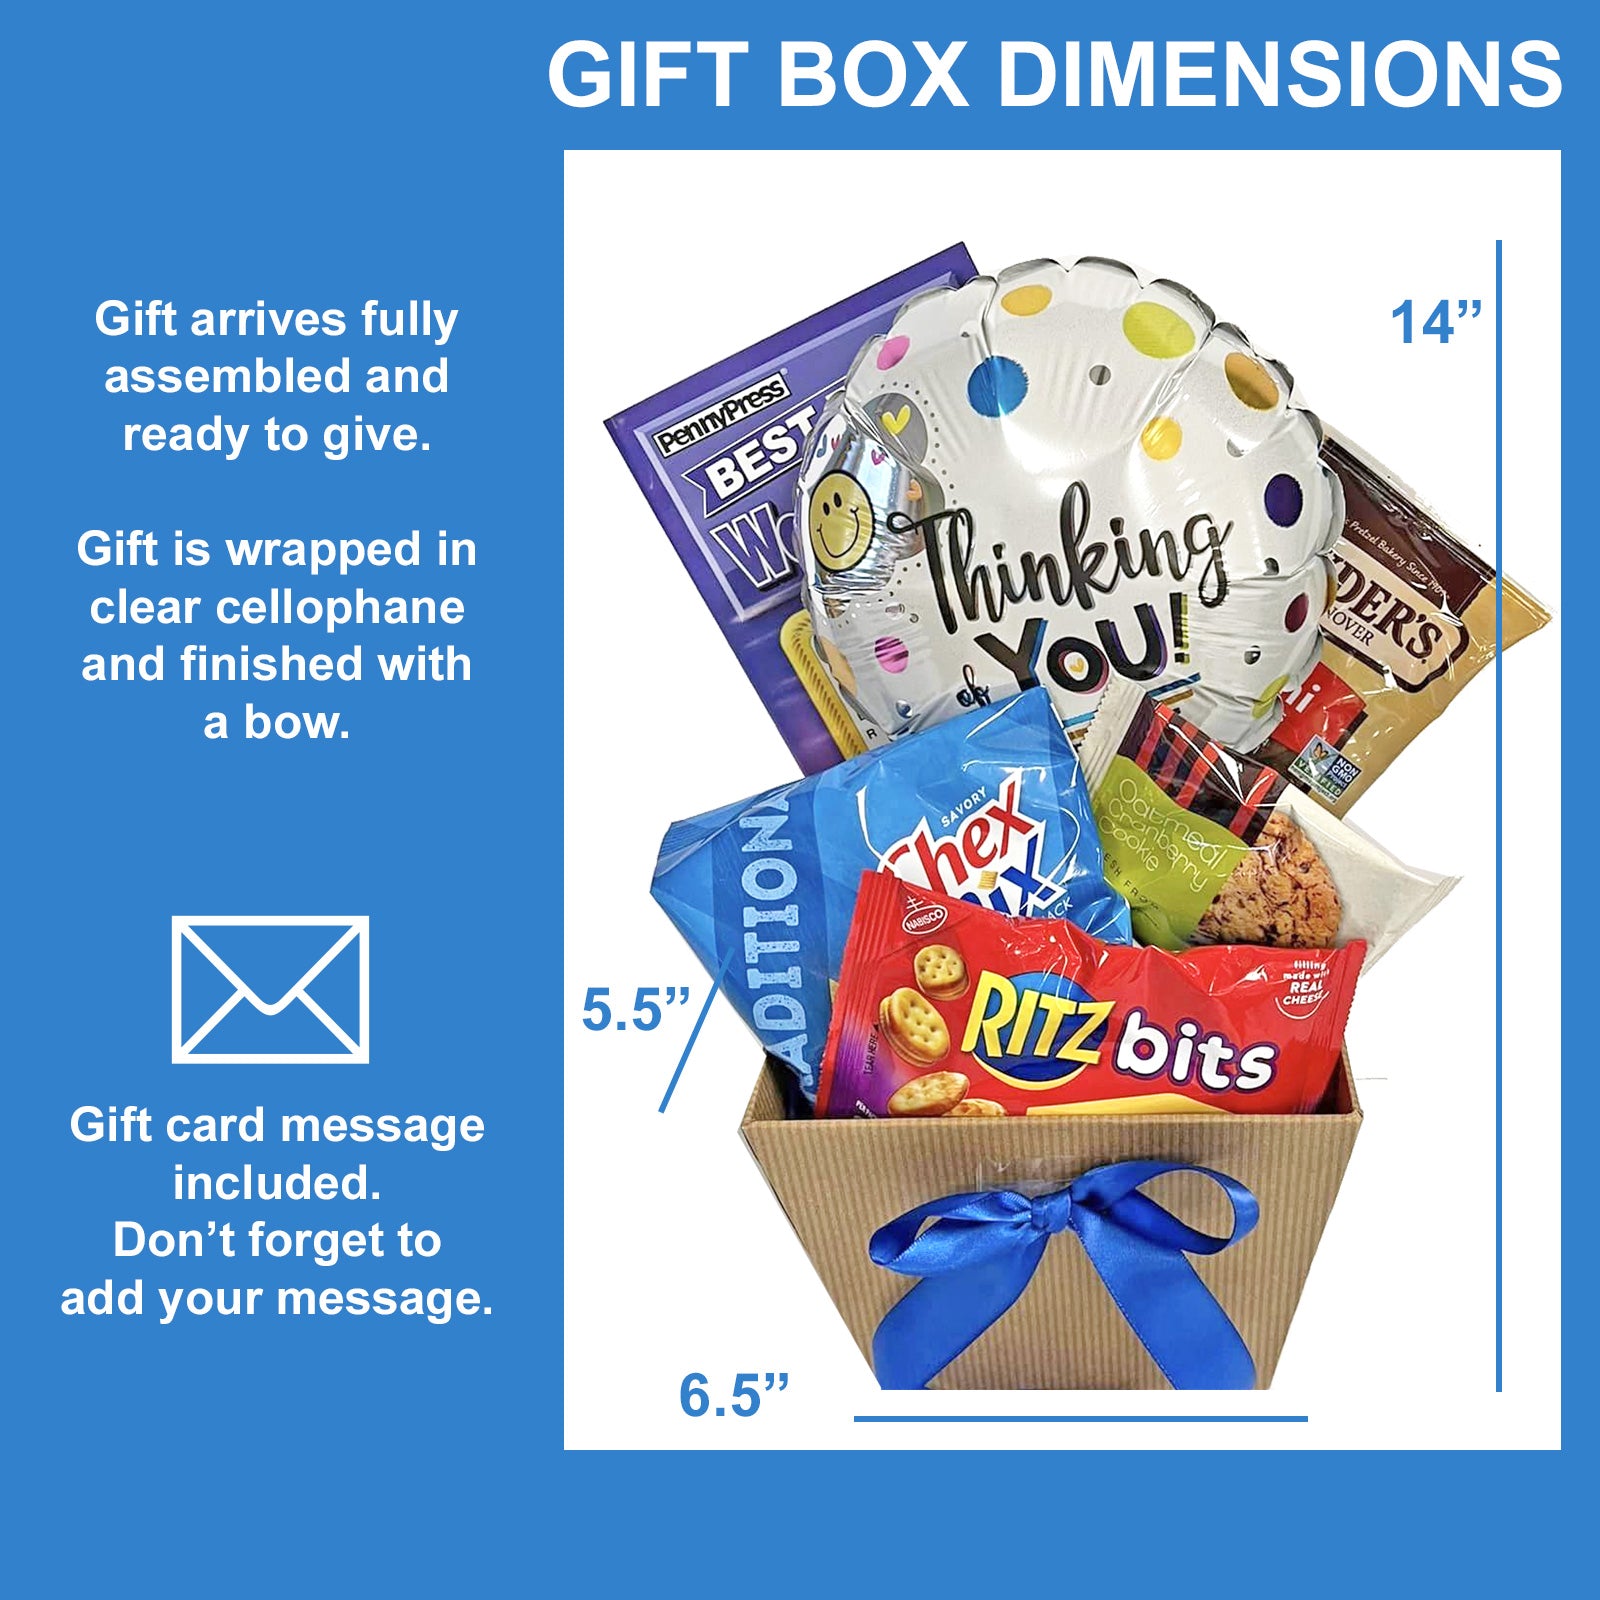 Thinking of You Gift Box with Word Seek Book